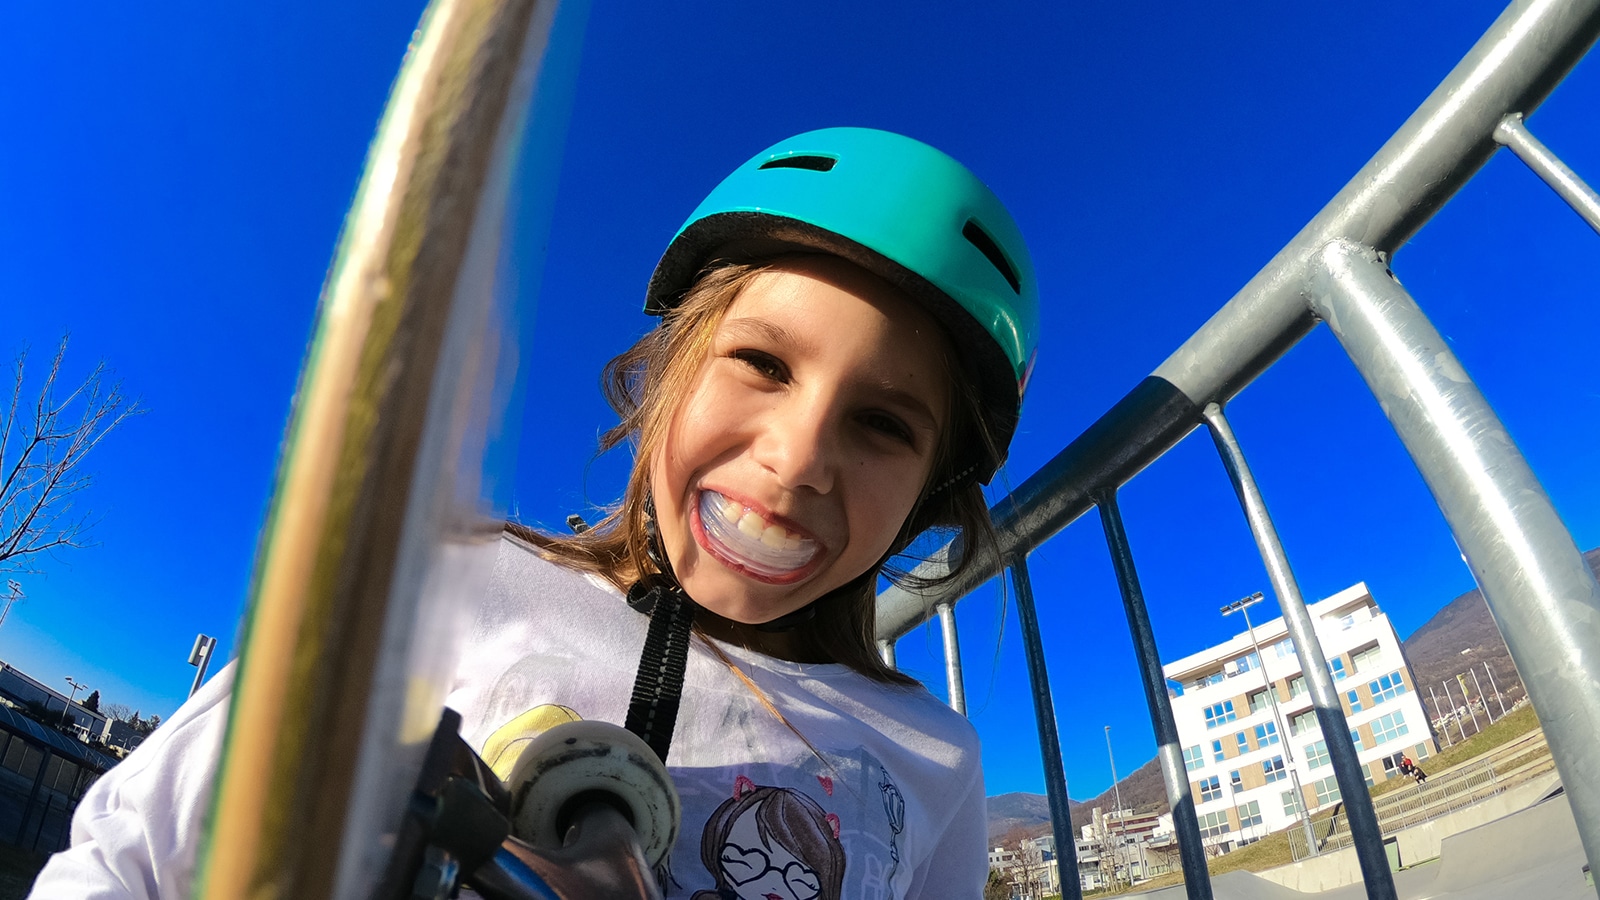 Child Smiling with Mouthguard